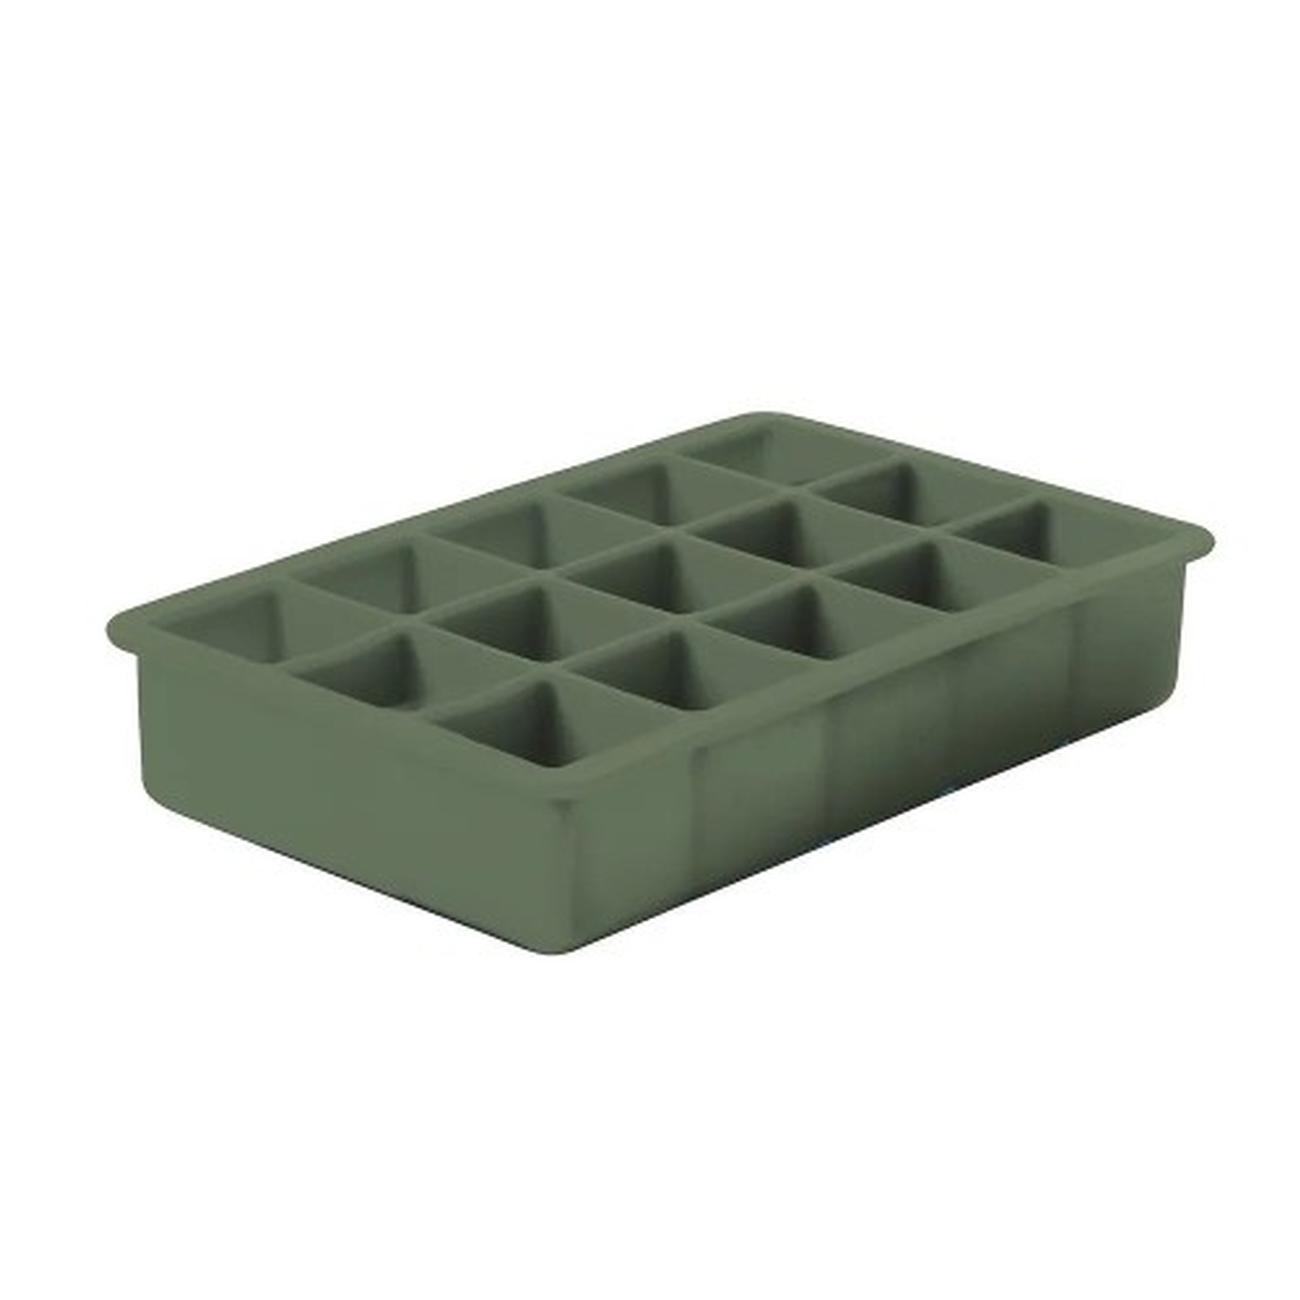 https://www.thekitchenwhisk.ie/contentfiles/productImages/Large/Classic-Ice-Tray-Green-Epicurean.jpg